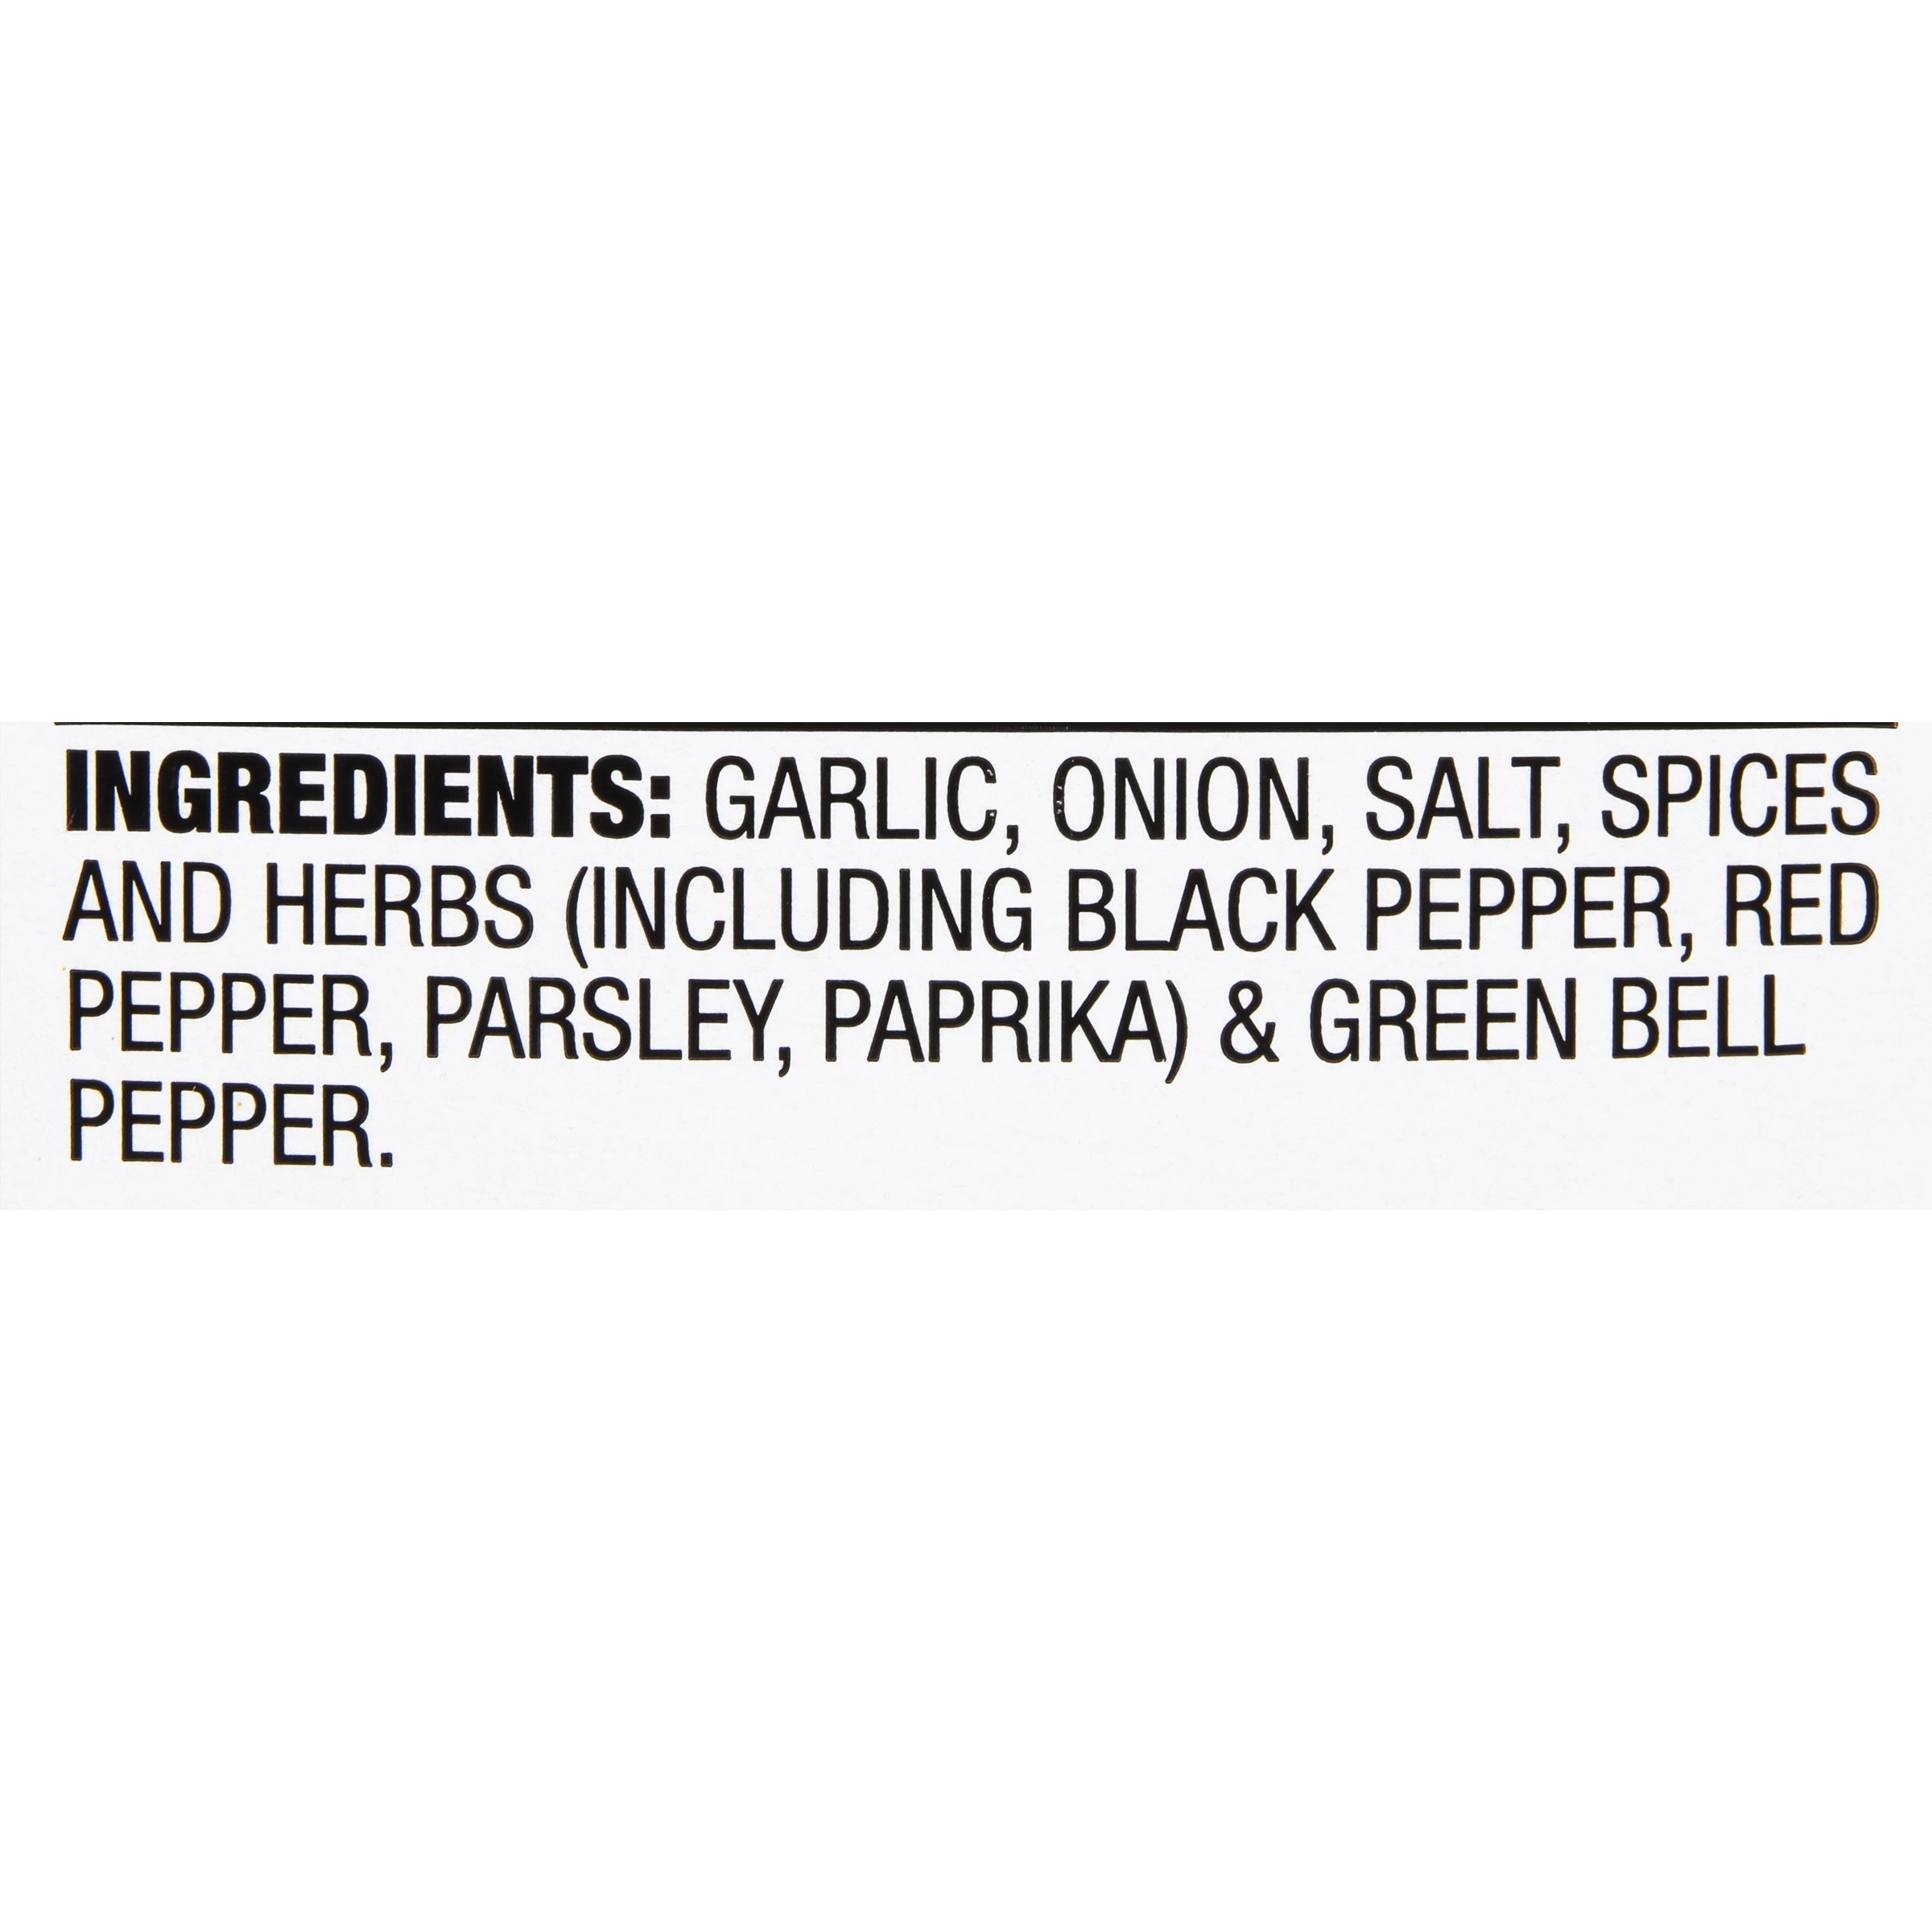 McCormick Perfect Pinch Lemon and Pepper Seasoning - Shop Herbs & Spices at  H-E-B